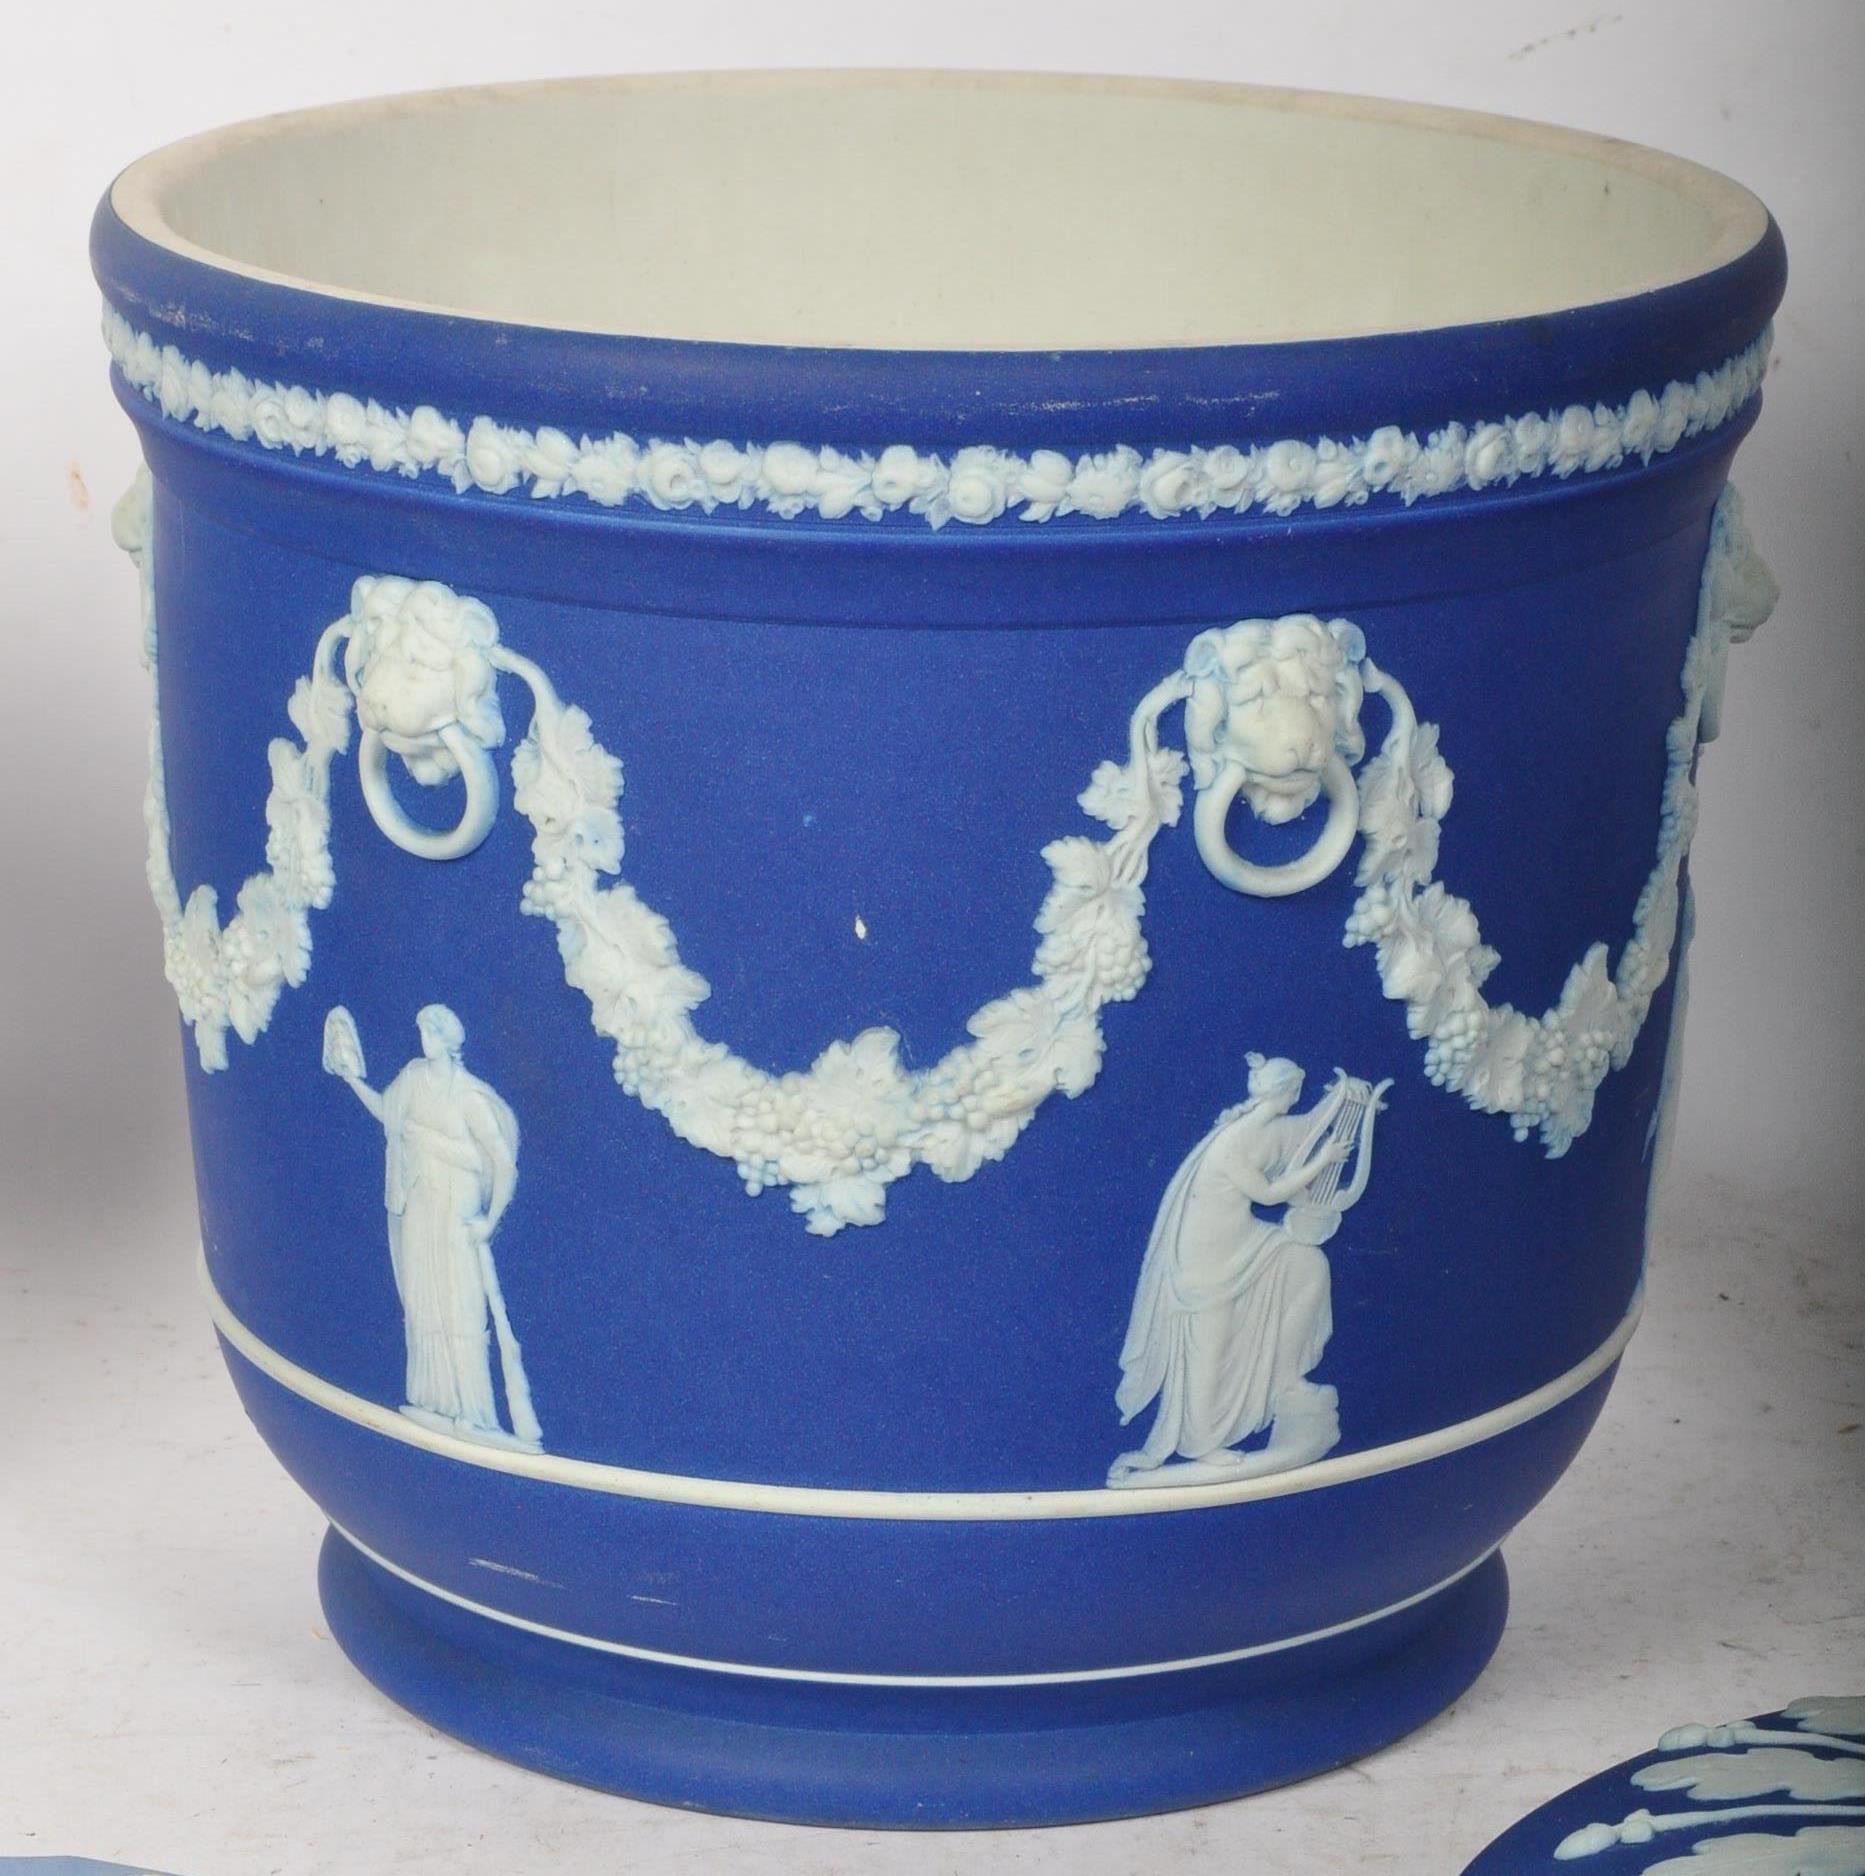 COLLECTION OF VINTAGE 20TH CENTURY WEDGWOOD JASPERWARE - Image 3 of 6